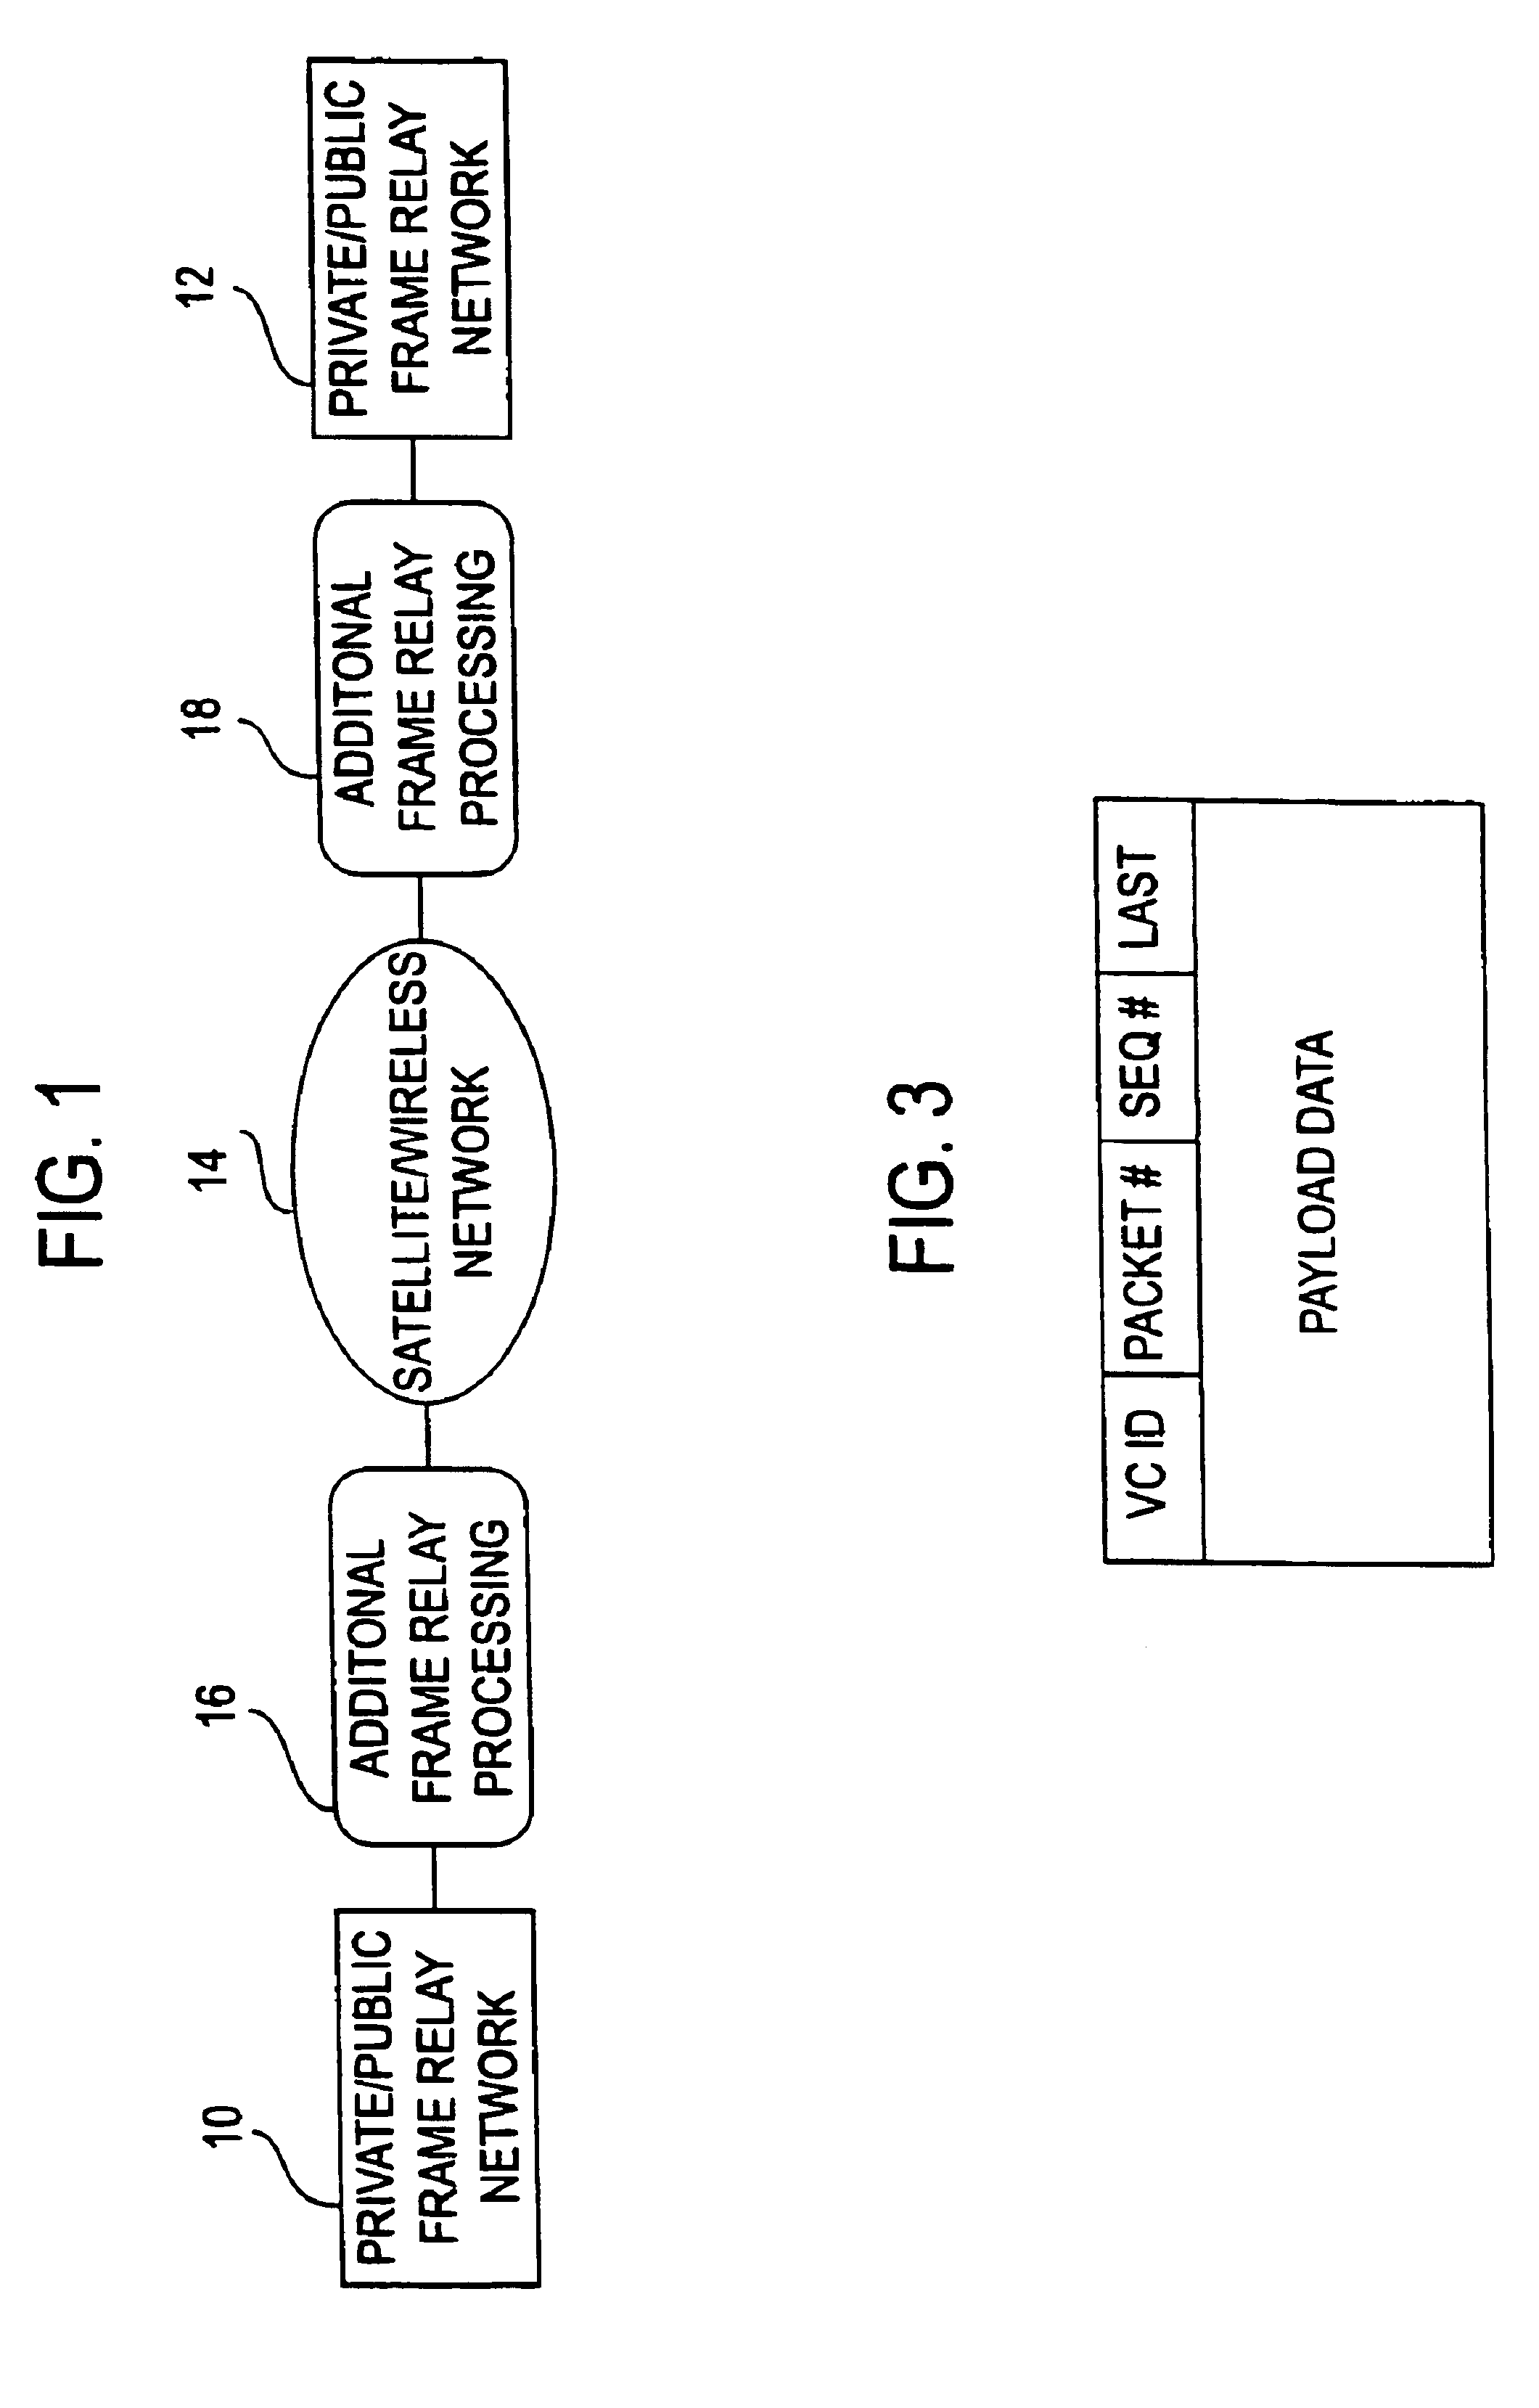 Method and system for transport of frame relay traffic over satellite/wireless networks